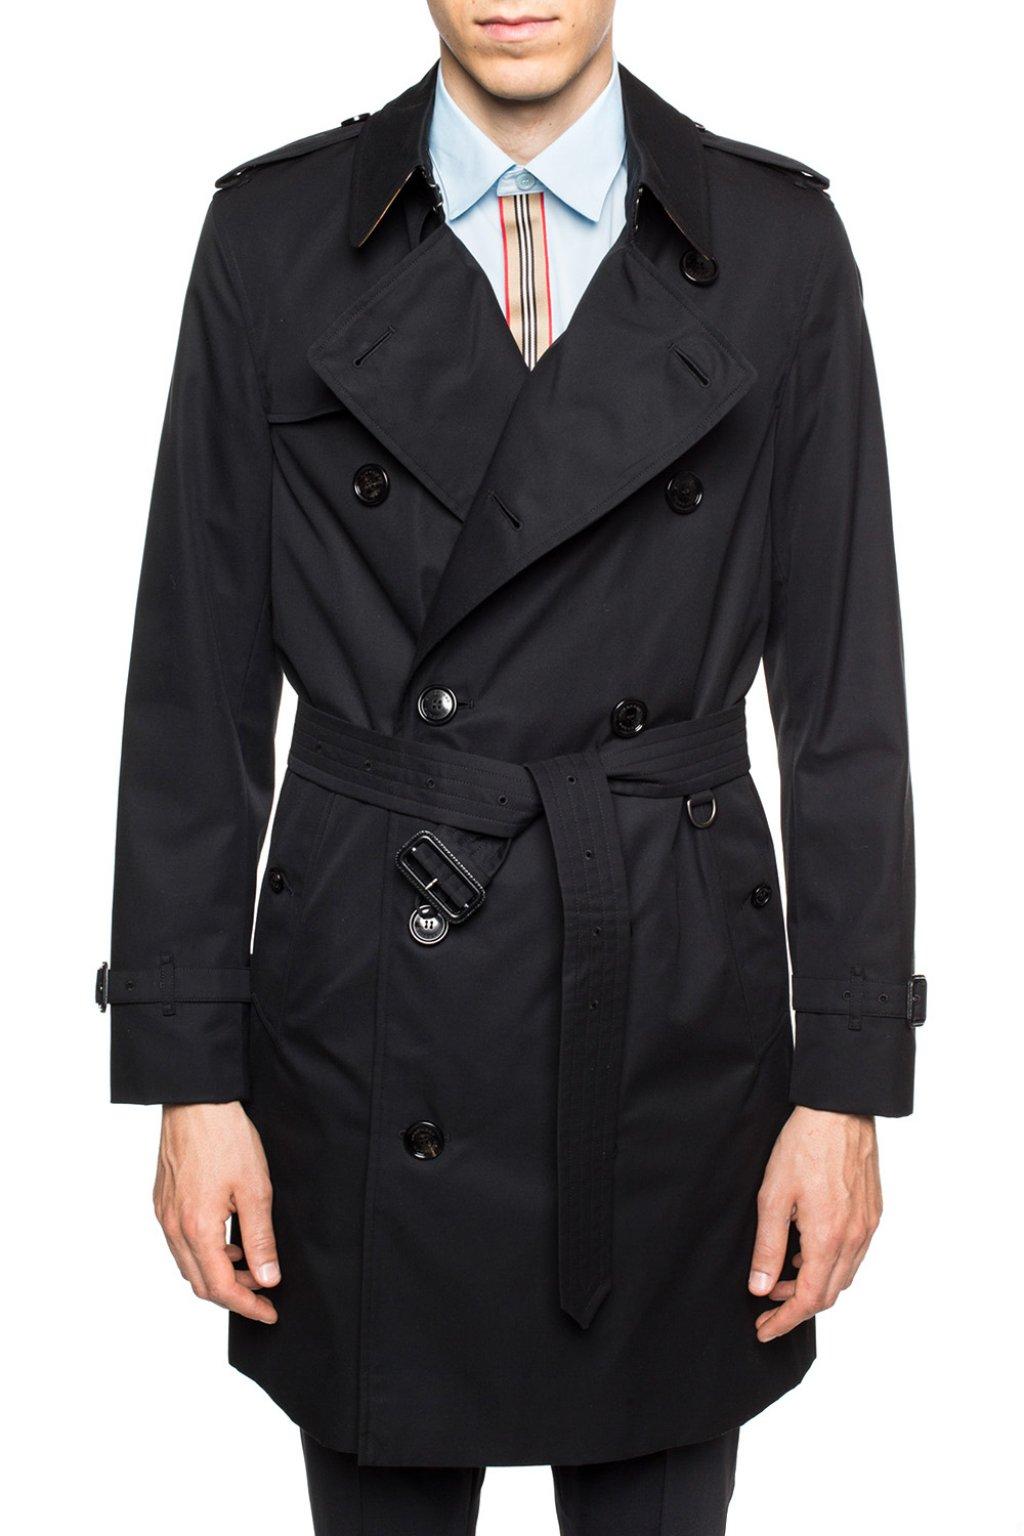 Burberry 'chelsea' Double-breasted Trench Coat in Black for Men - Lyst